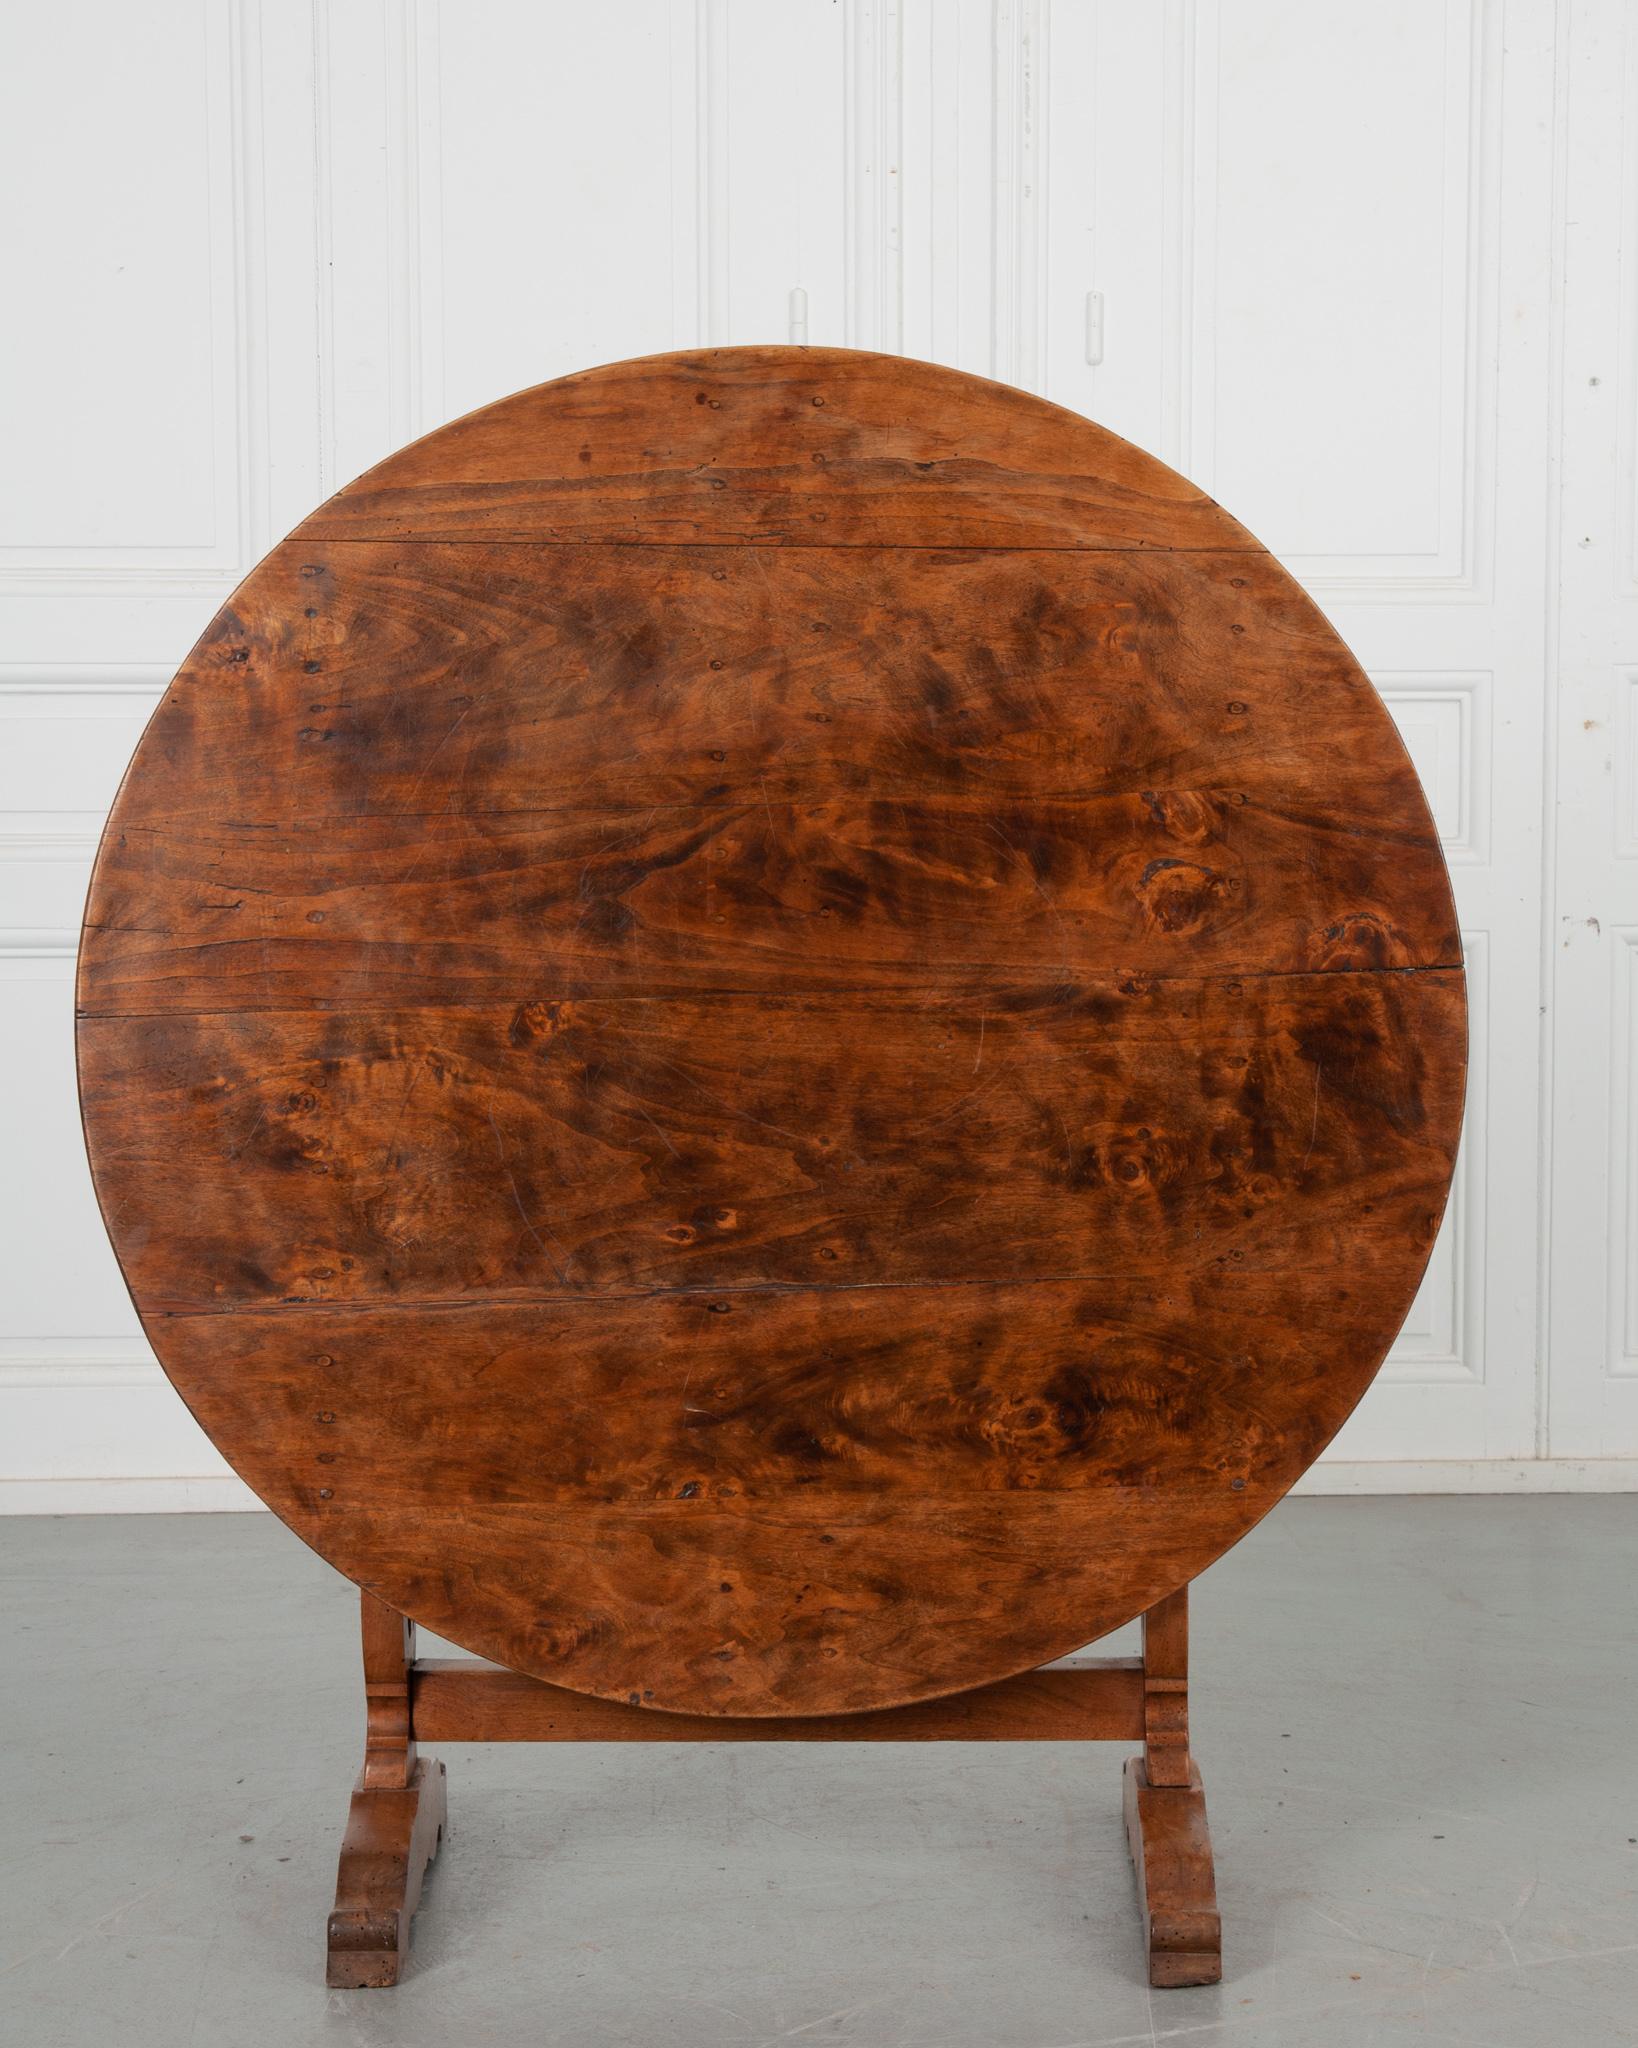 This beautiful walnut tasting table from 19th century France is a specialized folding Tilt-top table utilized at vineyards and wineries across Europe, providing a place to stop and taste their different vintages. The underside of the table houses